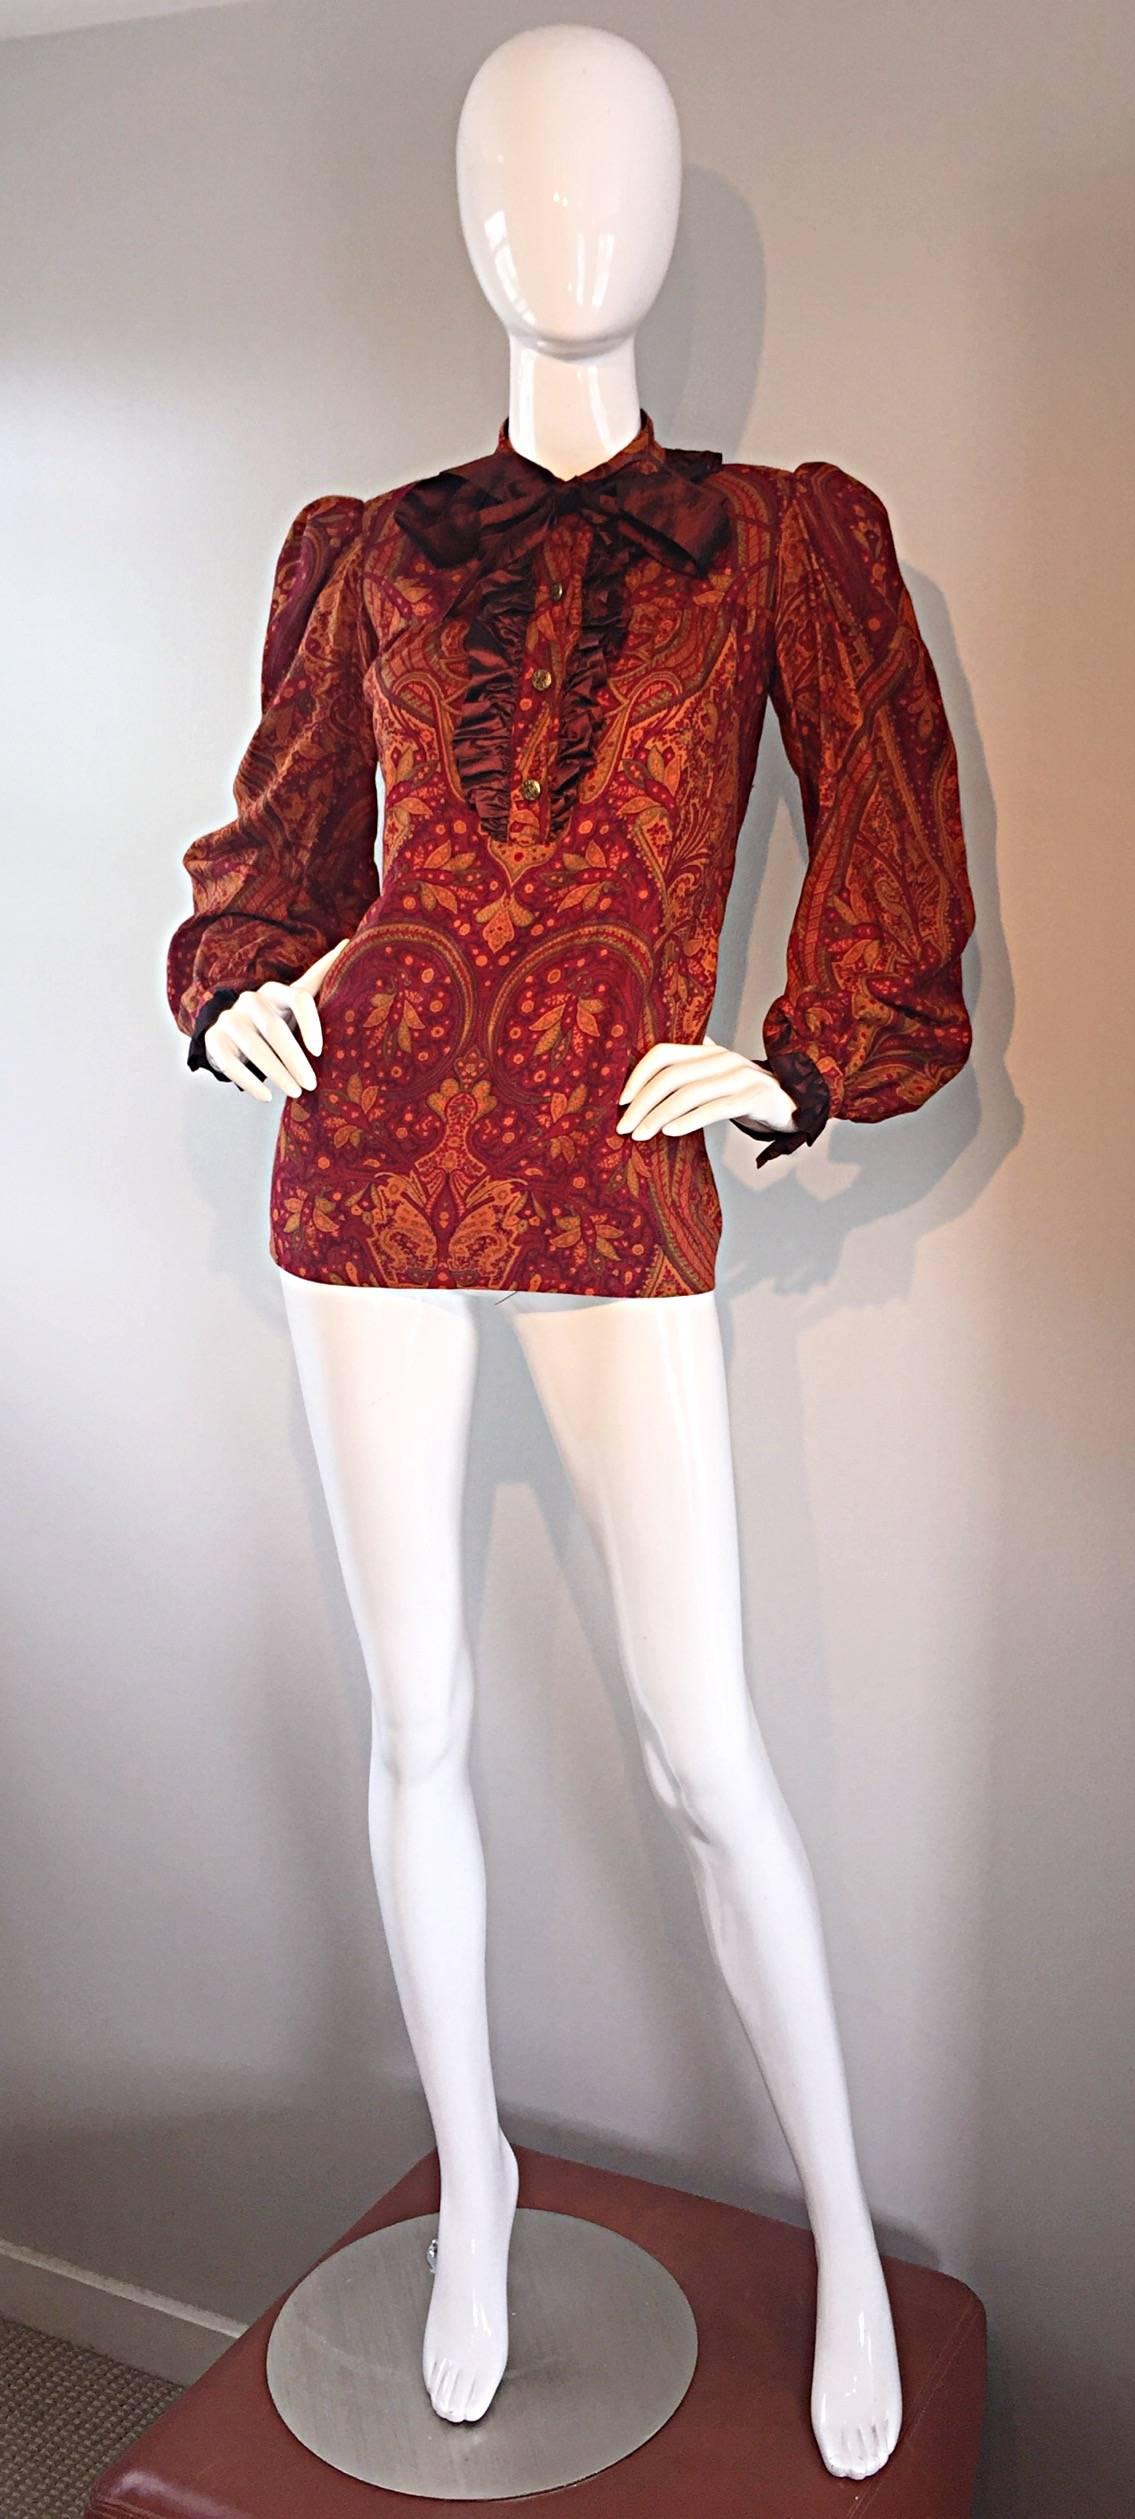 Amazing vintage YVES SAINT LAURENT 'Rive Gauche' blouse from the famed 1976 